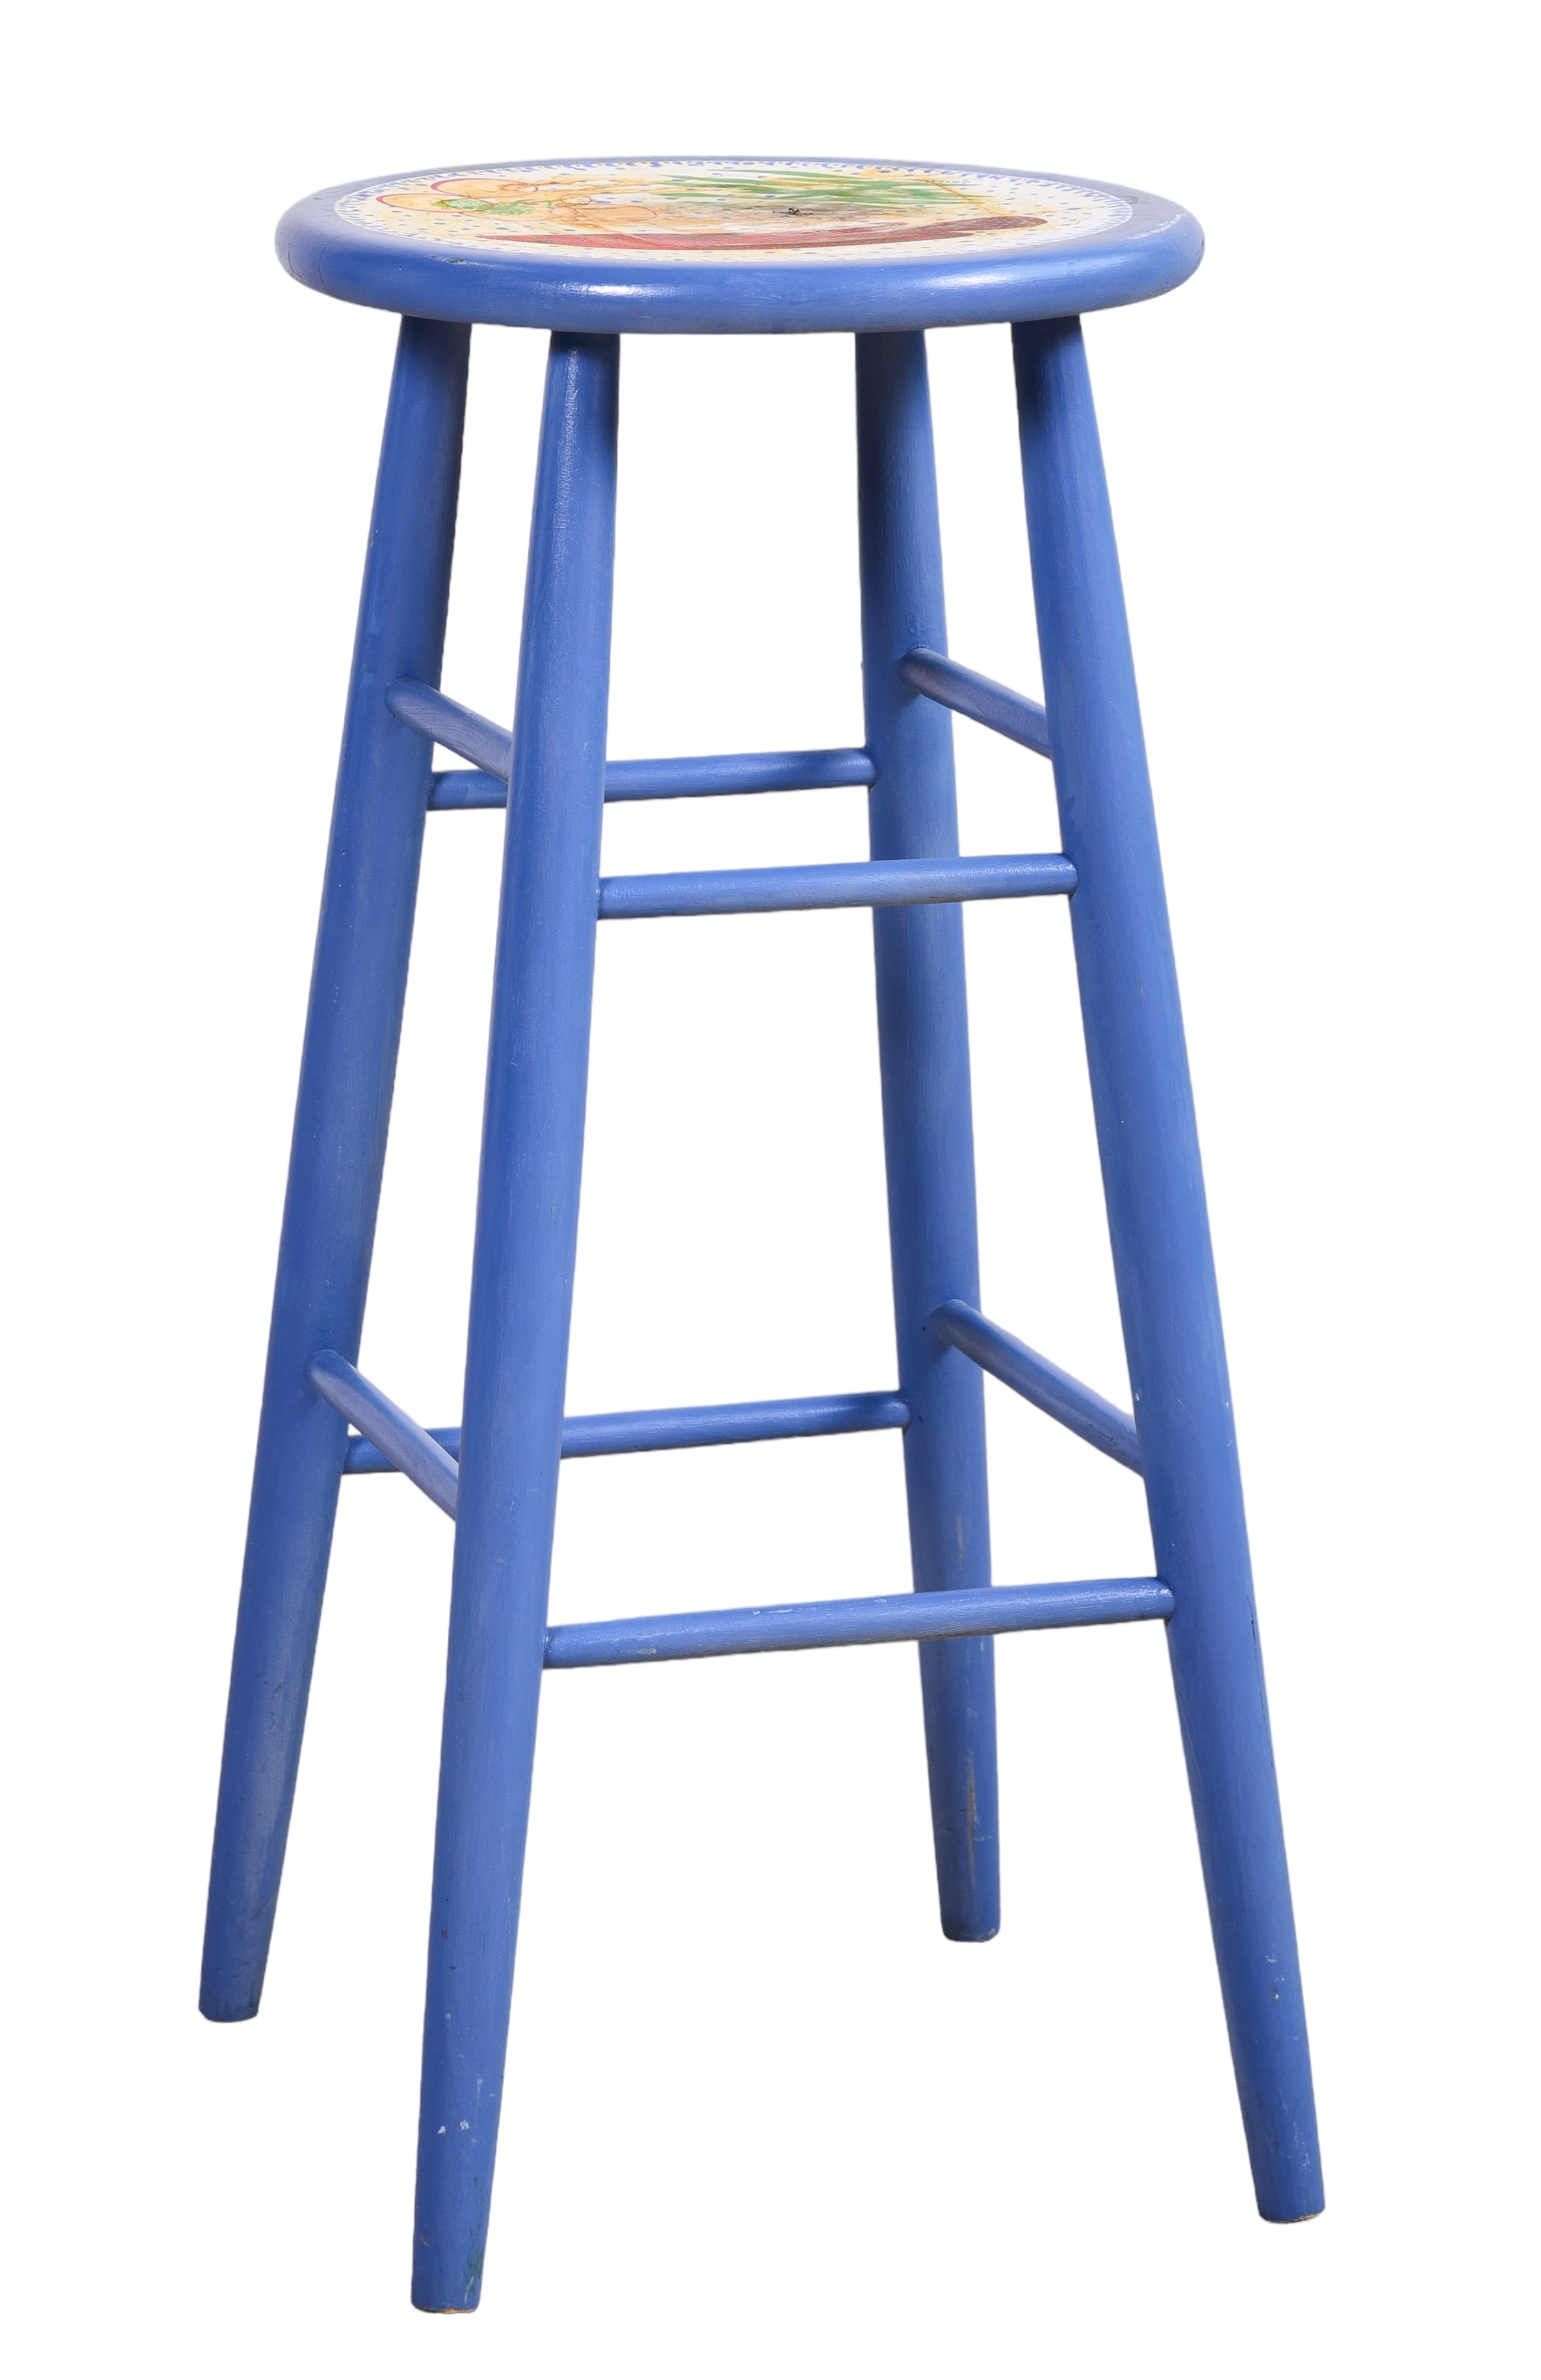 Paint decorated barstool blue 3c664a